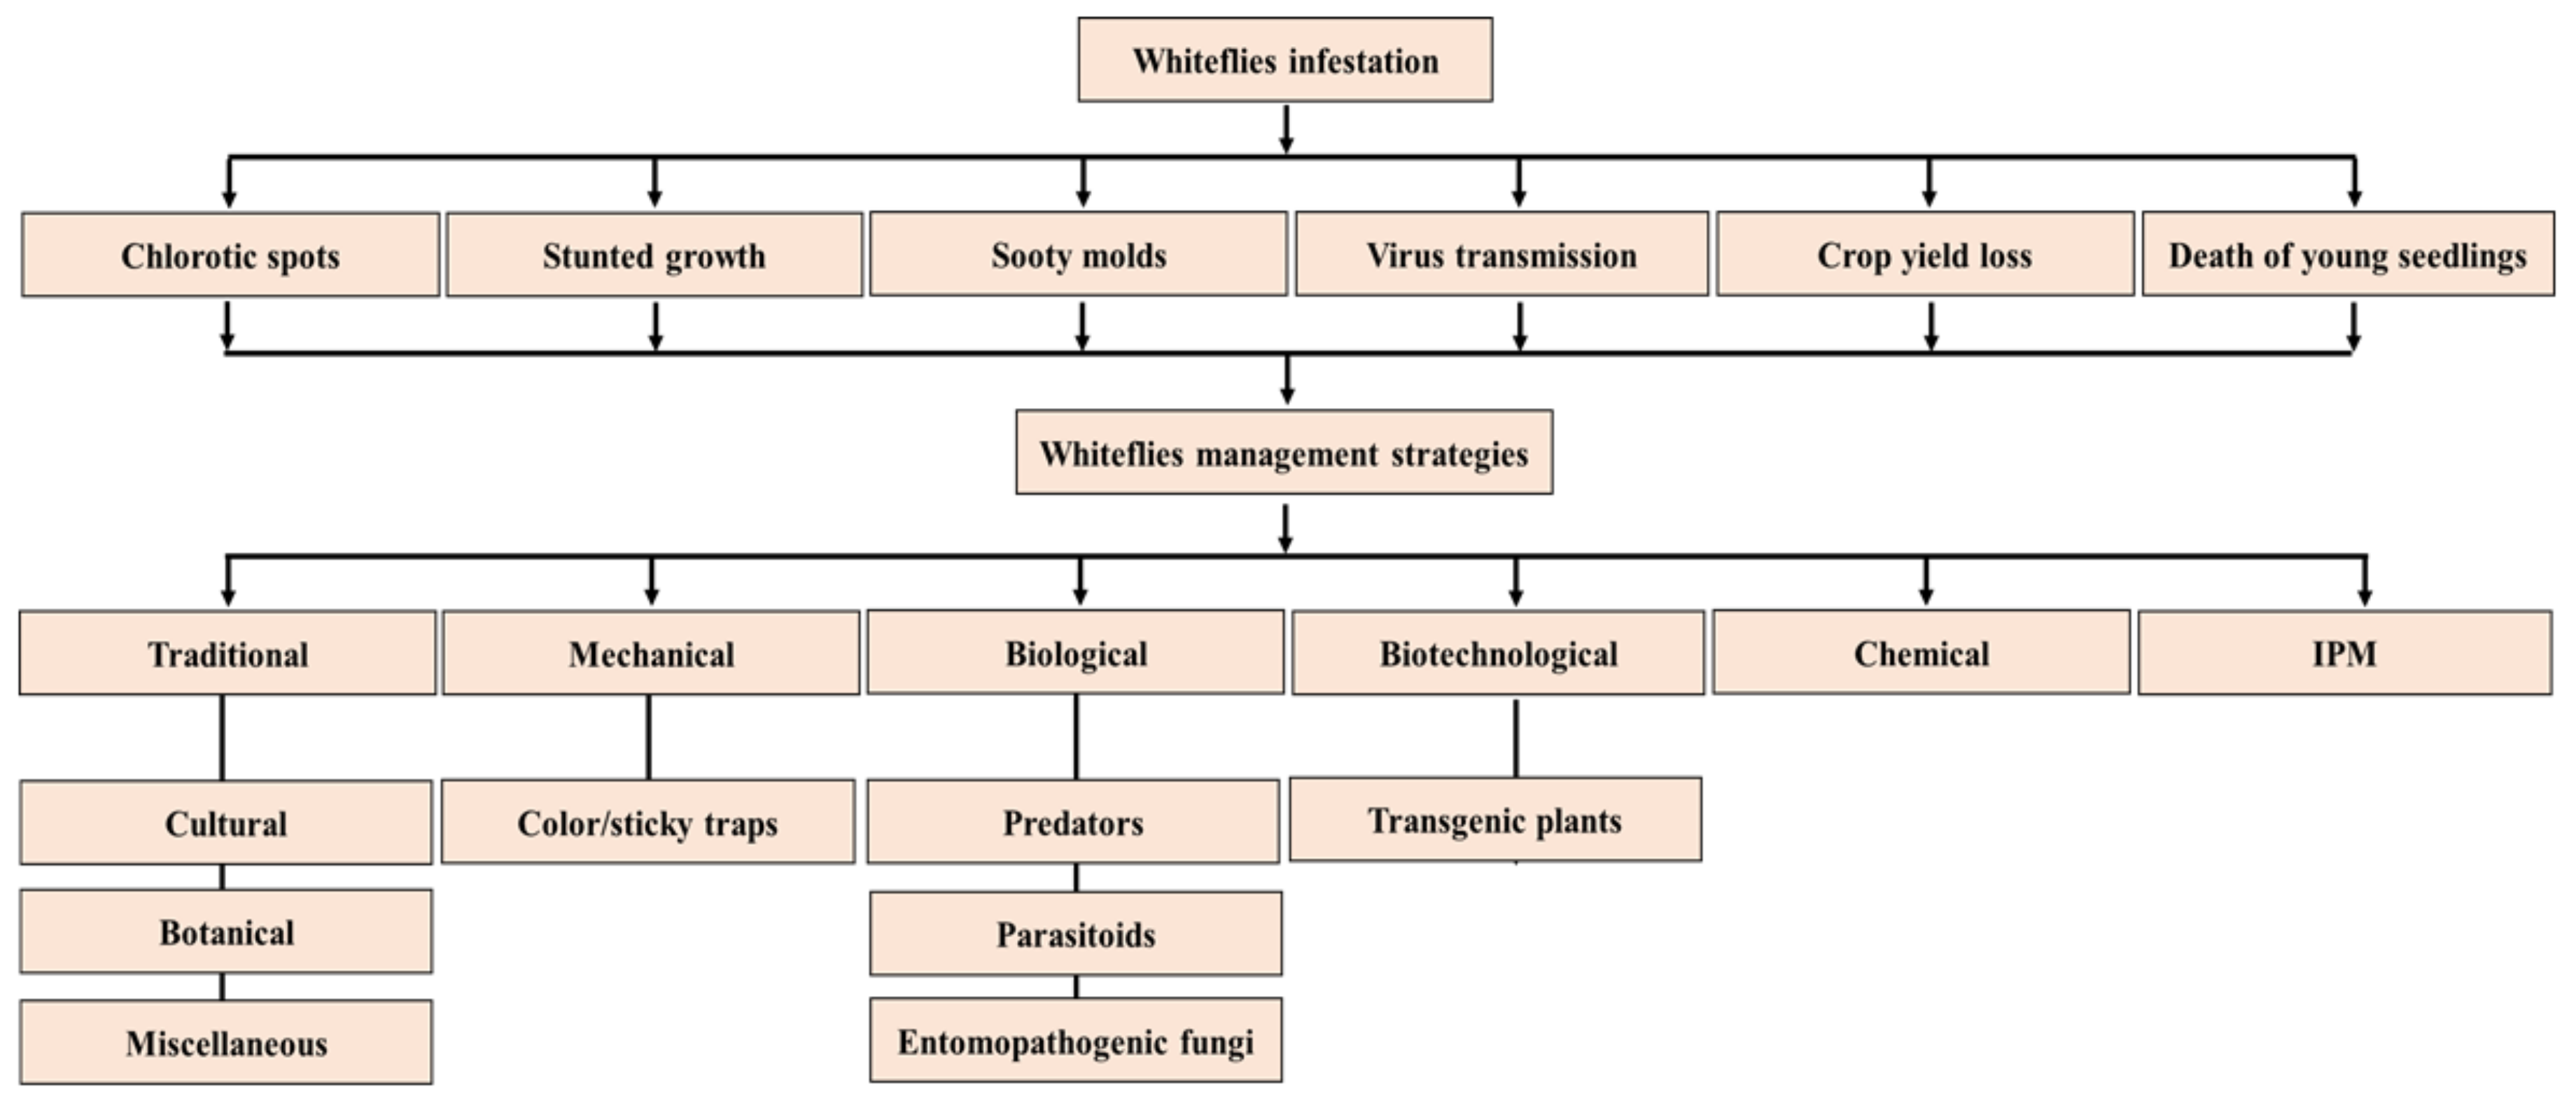 Methods for the Extraction of Endosymbionts from the Whitefly